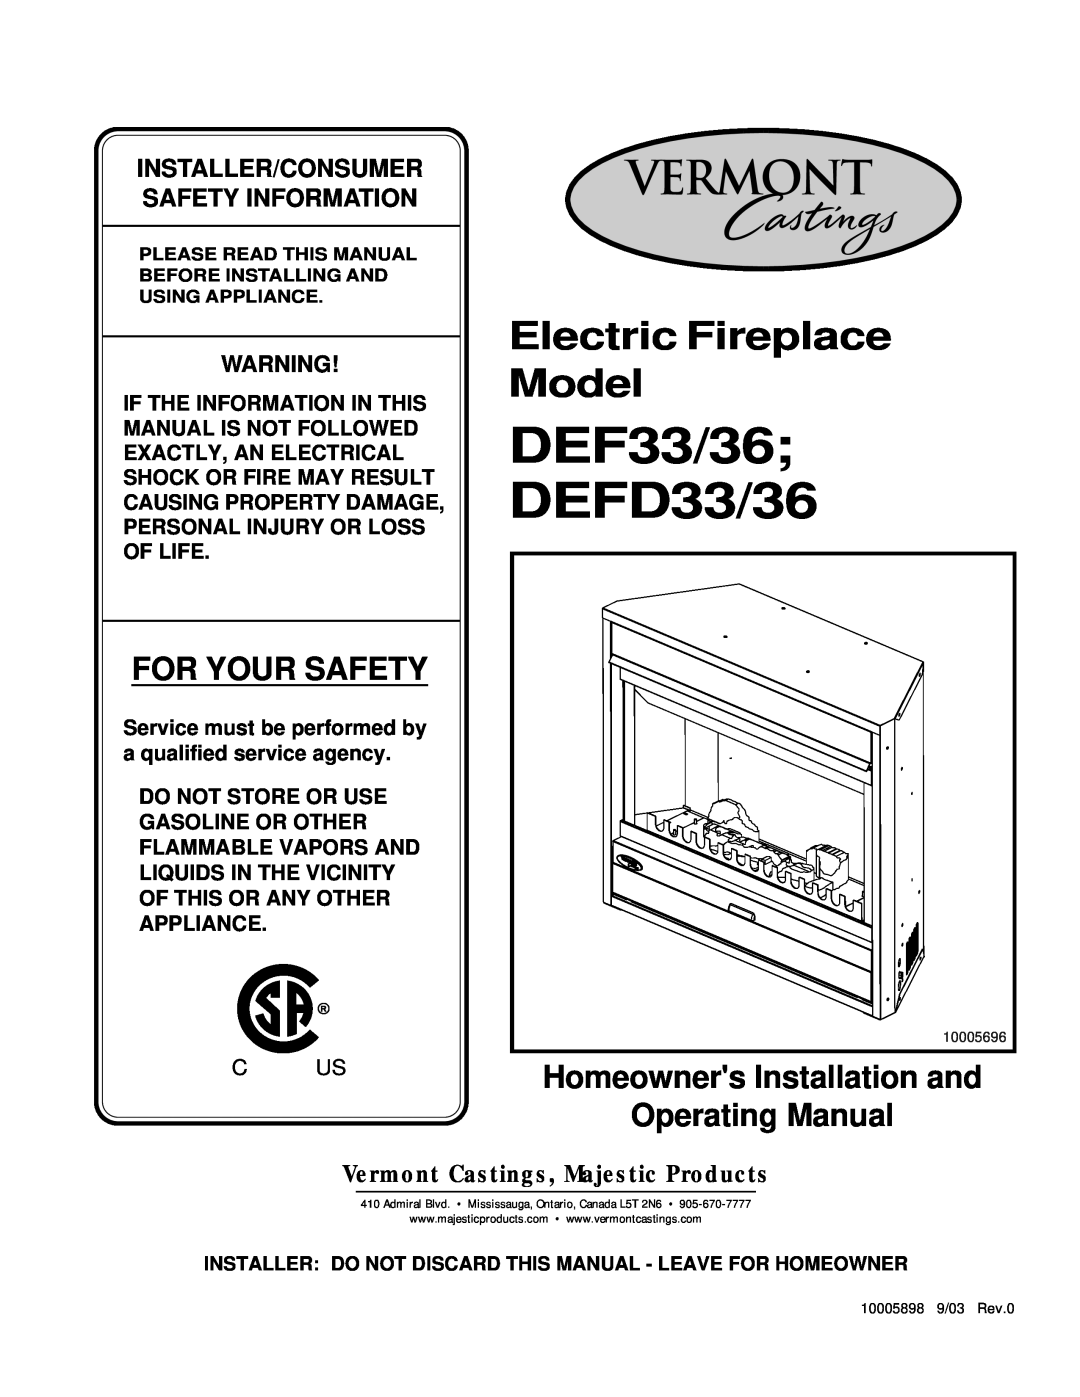 Vermont Casting DEFD36 manual For Your Safety, Homeowners Installation and Operating Manual, DEF33/36 DEFD33/36 